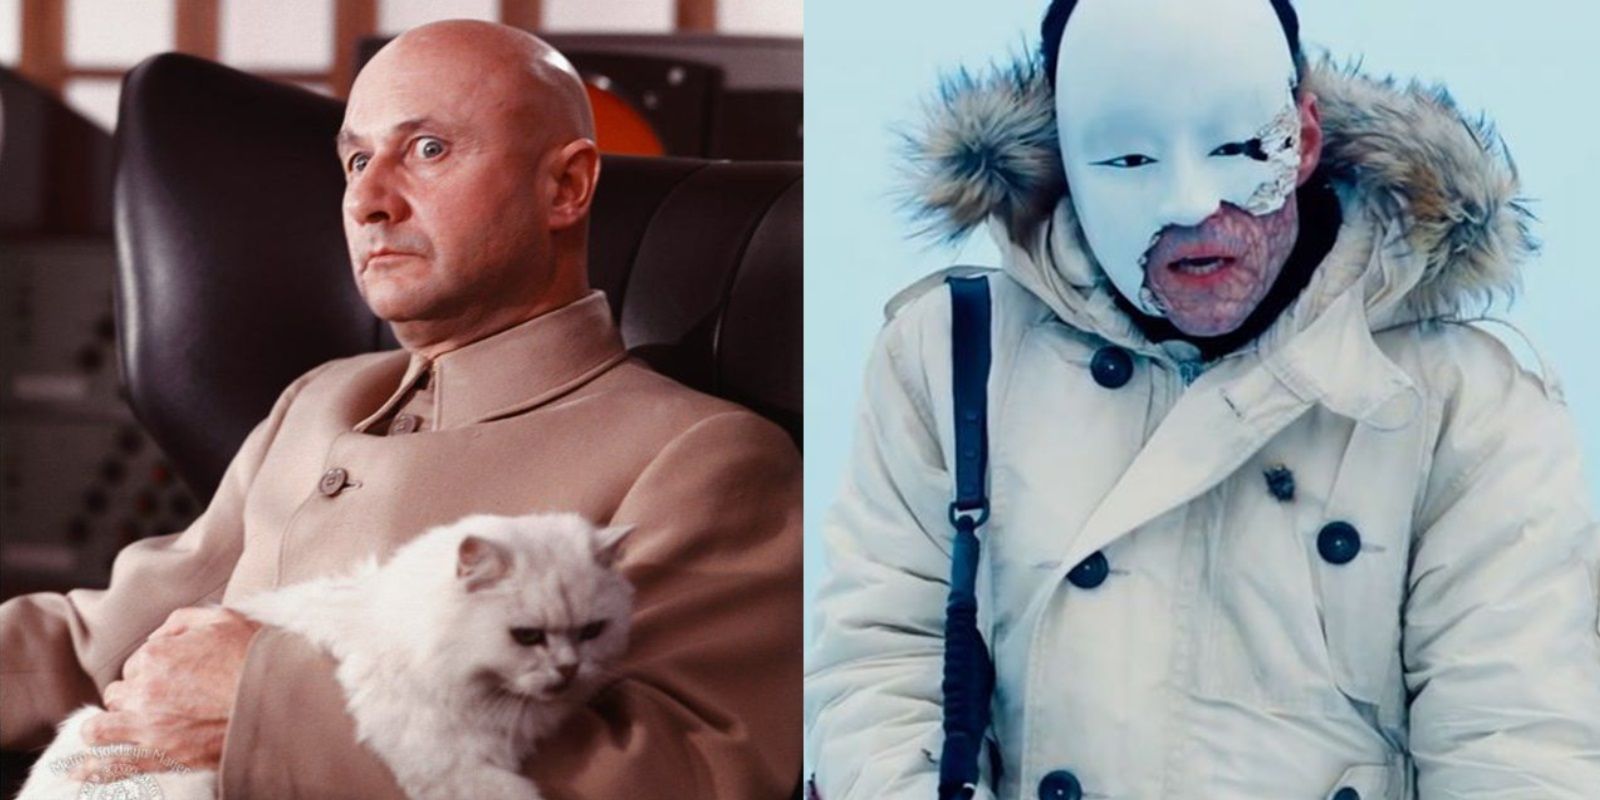 Split image of Blofeld stroking a cat and Safin wearing a mask